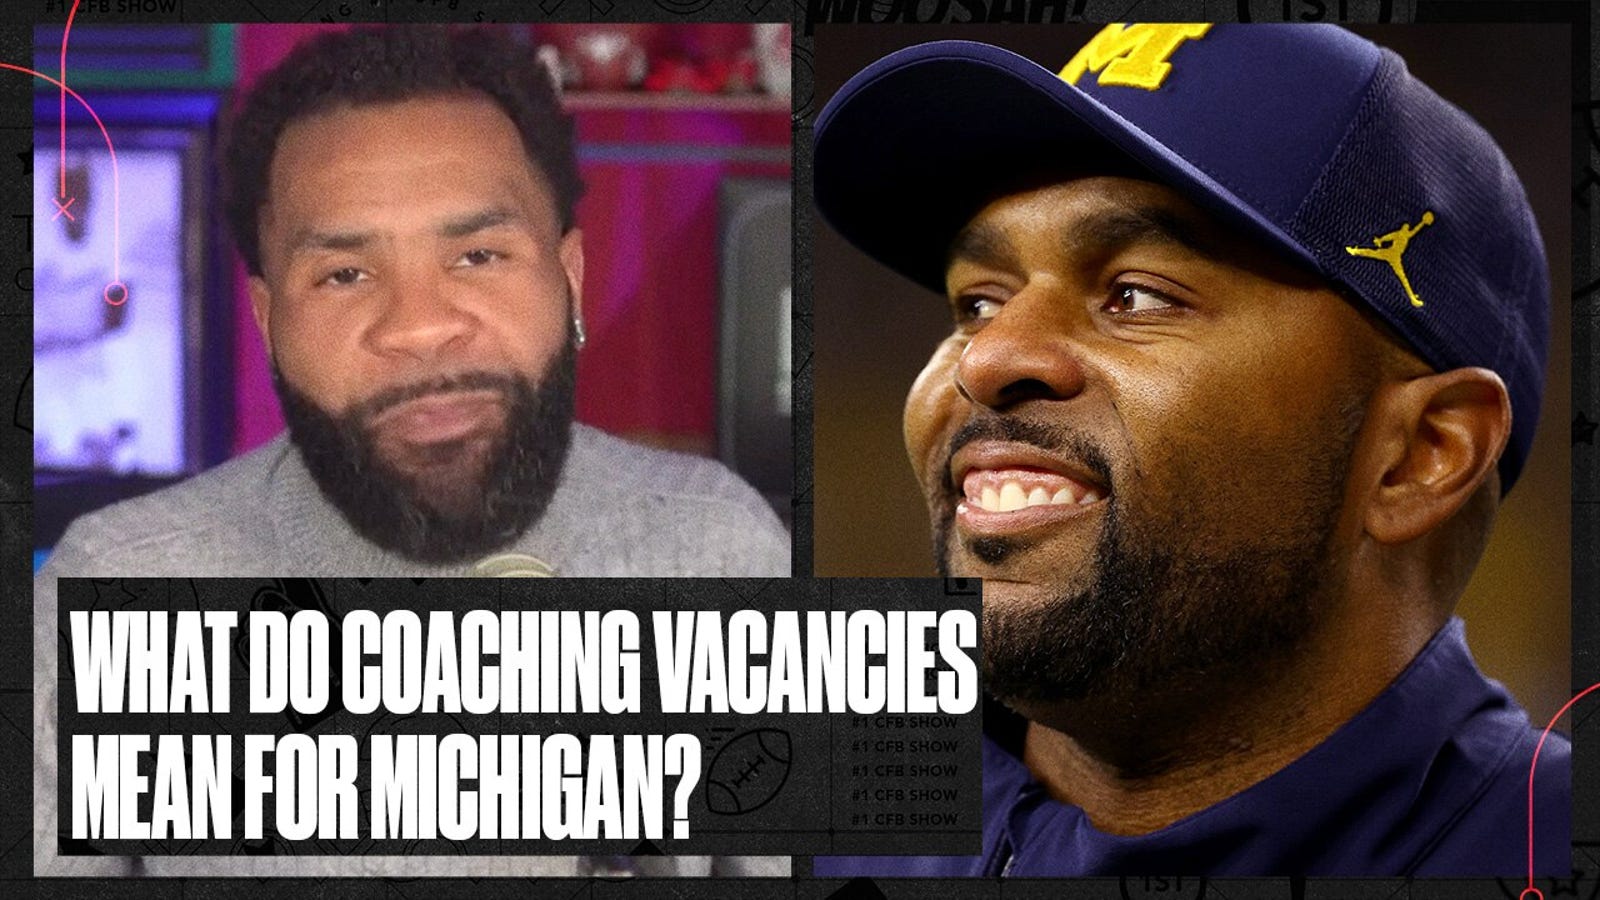 Michigan coaching vacancies: What does it mean for Sherrone Moore?